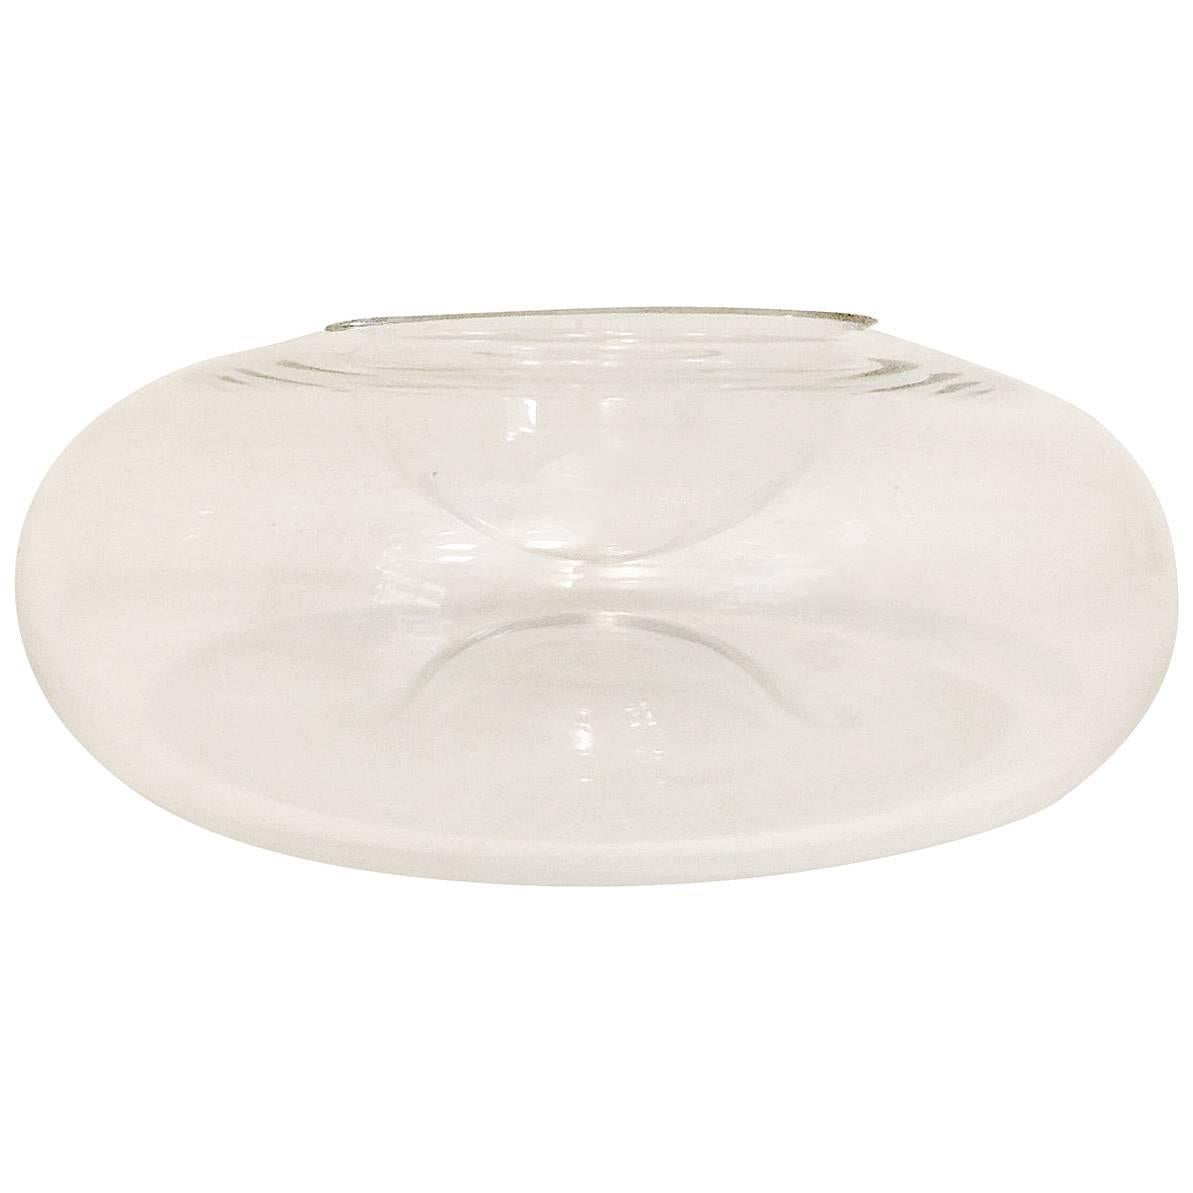 Men's Crystal Vesuvius Caviar Serving Dish with Lift Out Bowl and Cooling Bowl